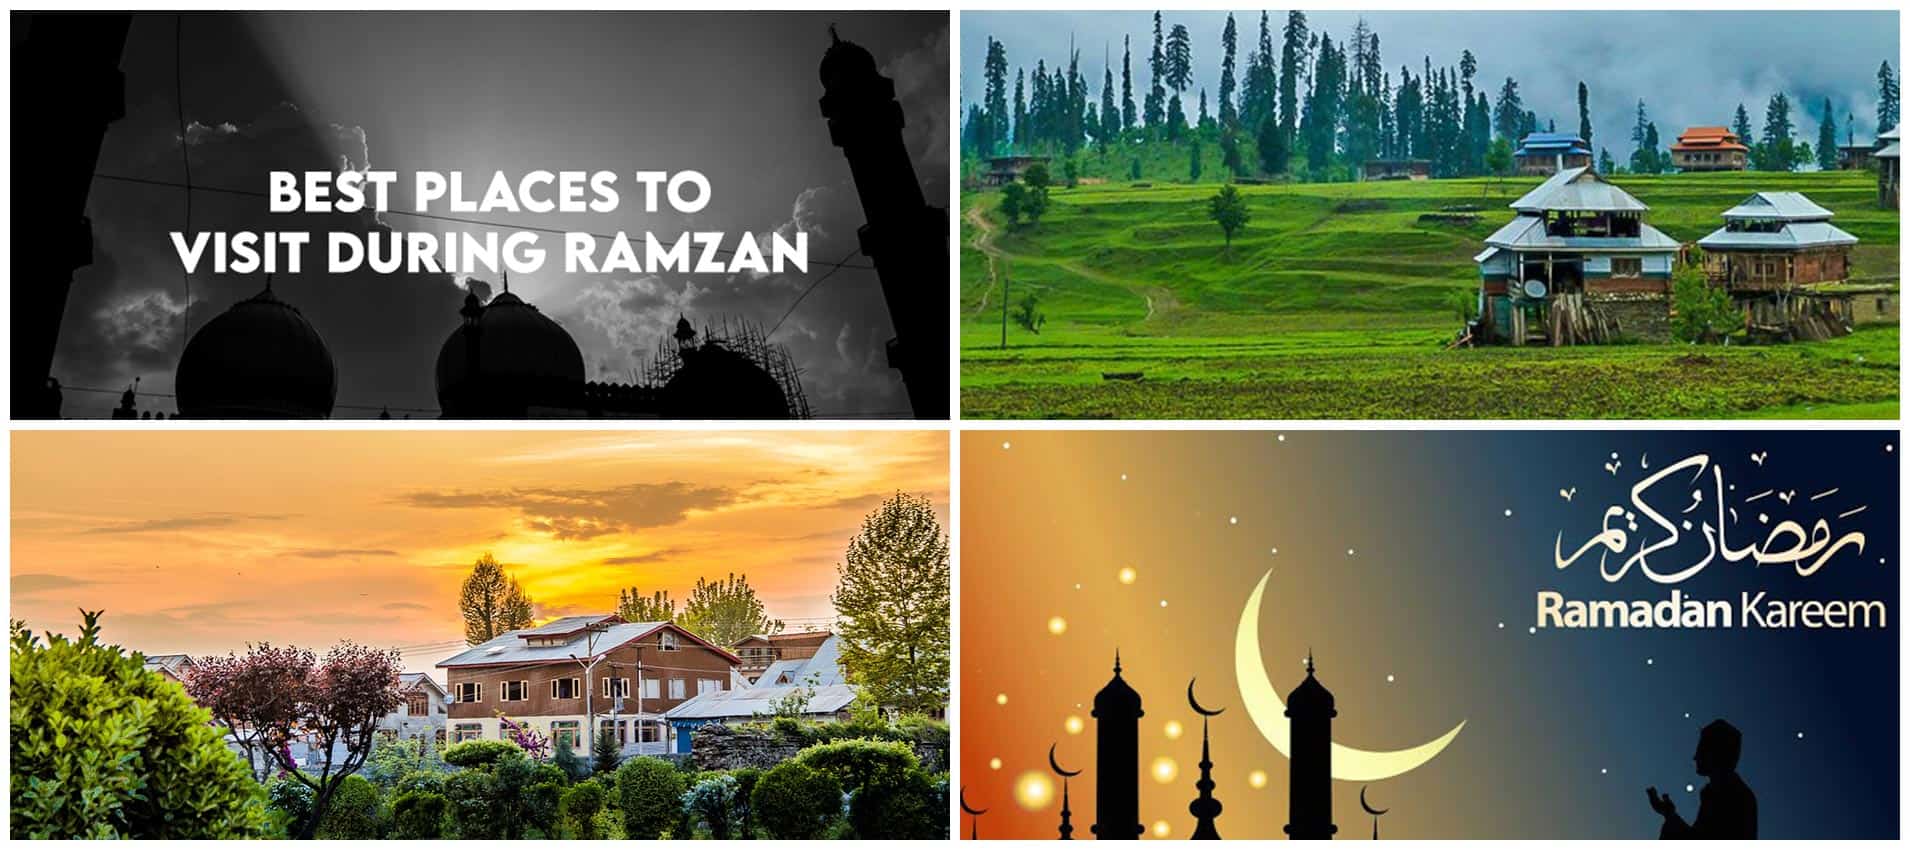 Best Places to Visit During Ramzan in Pakistan